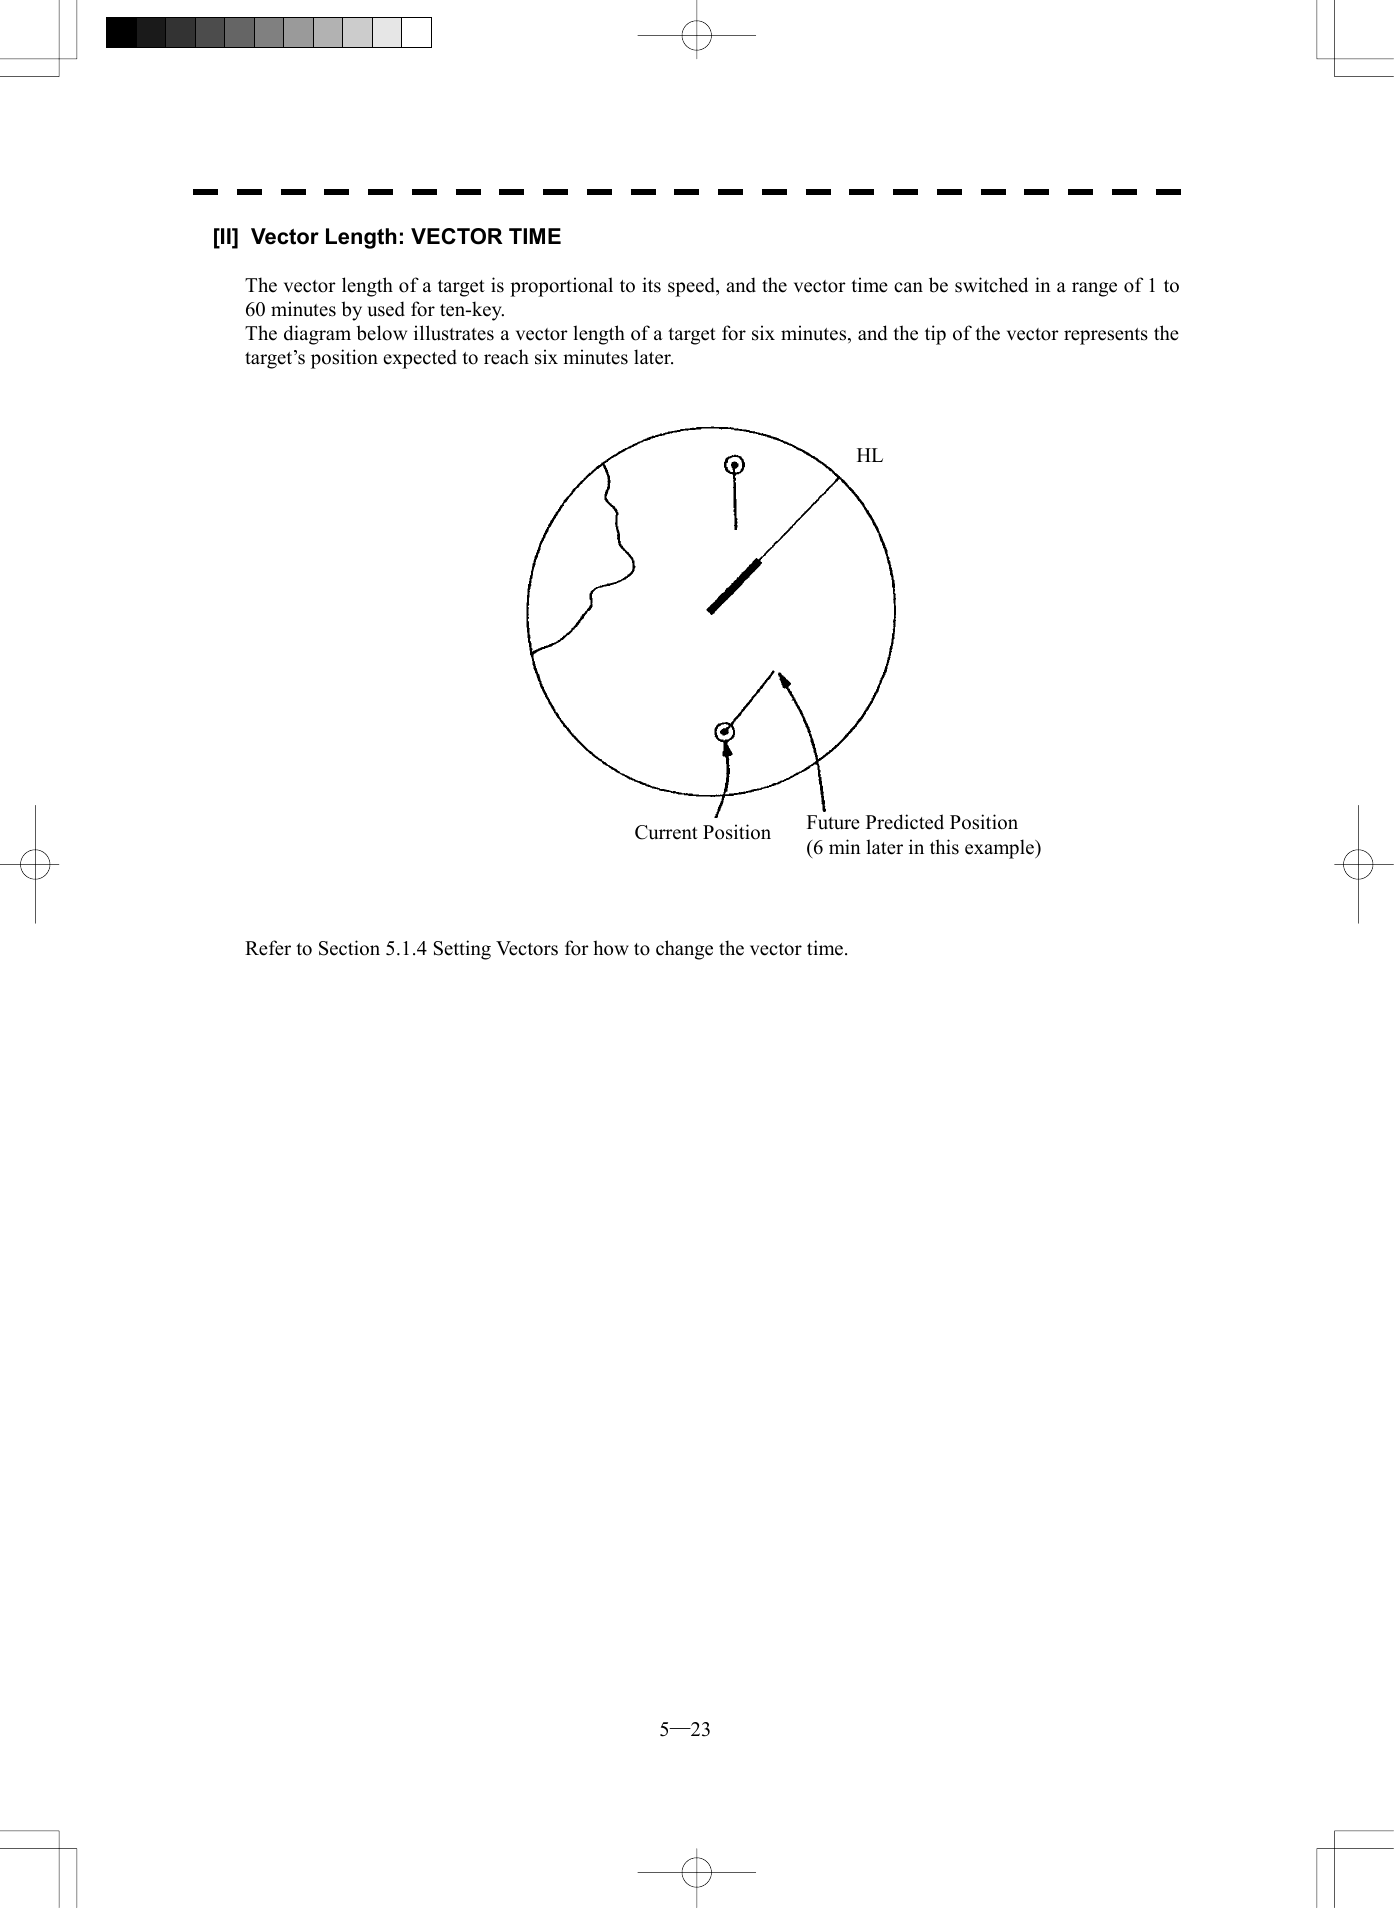  5─23 [II]  Vector Length: VECTOR TIME  The vector length of a target is proportional to its speed, and the vector time can be switched in a range of 1 to 60 minutes by used for ten-key. The diagram below illustrates a vector length of a target for six minutes, and the tip of the vector represents the target’s position expected to reach six minutes later.         Refer to Section 5.1.4 Setting Vectors for how to change the vector time. Current Position Future Predicted Position (6 min later in this example)HL 